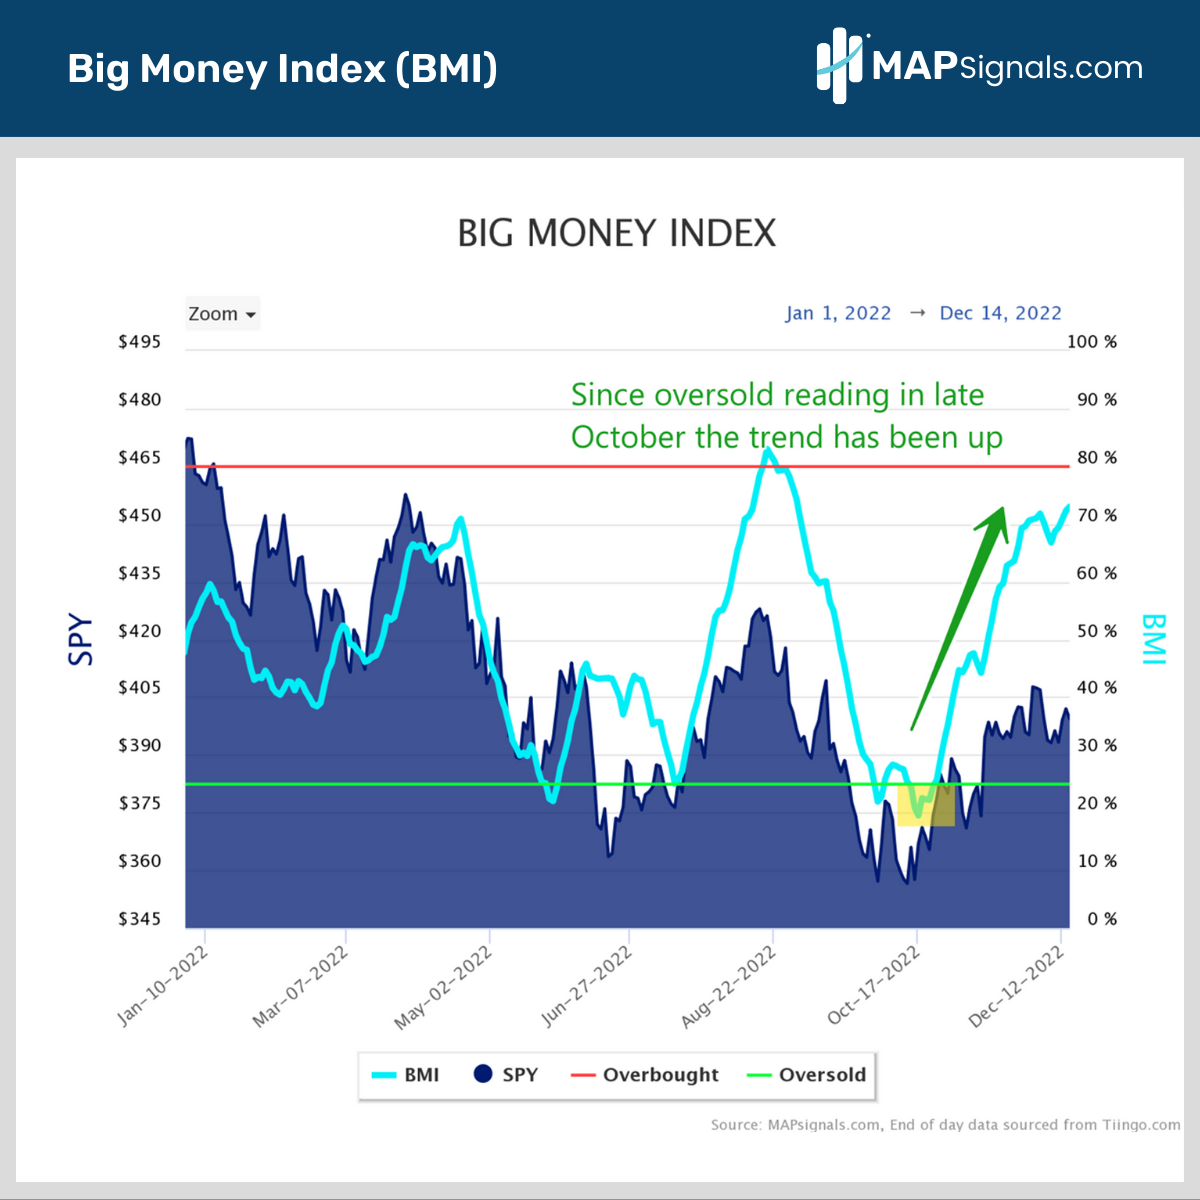 Since Oversold in October the BMI has been up | Big Money Index